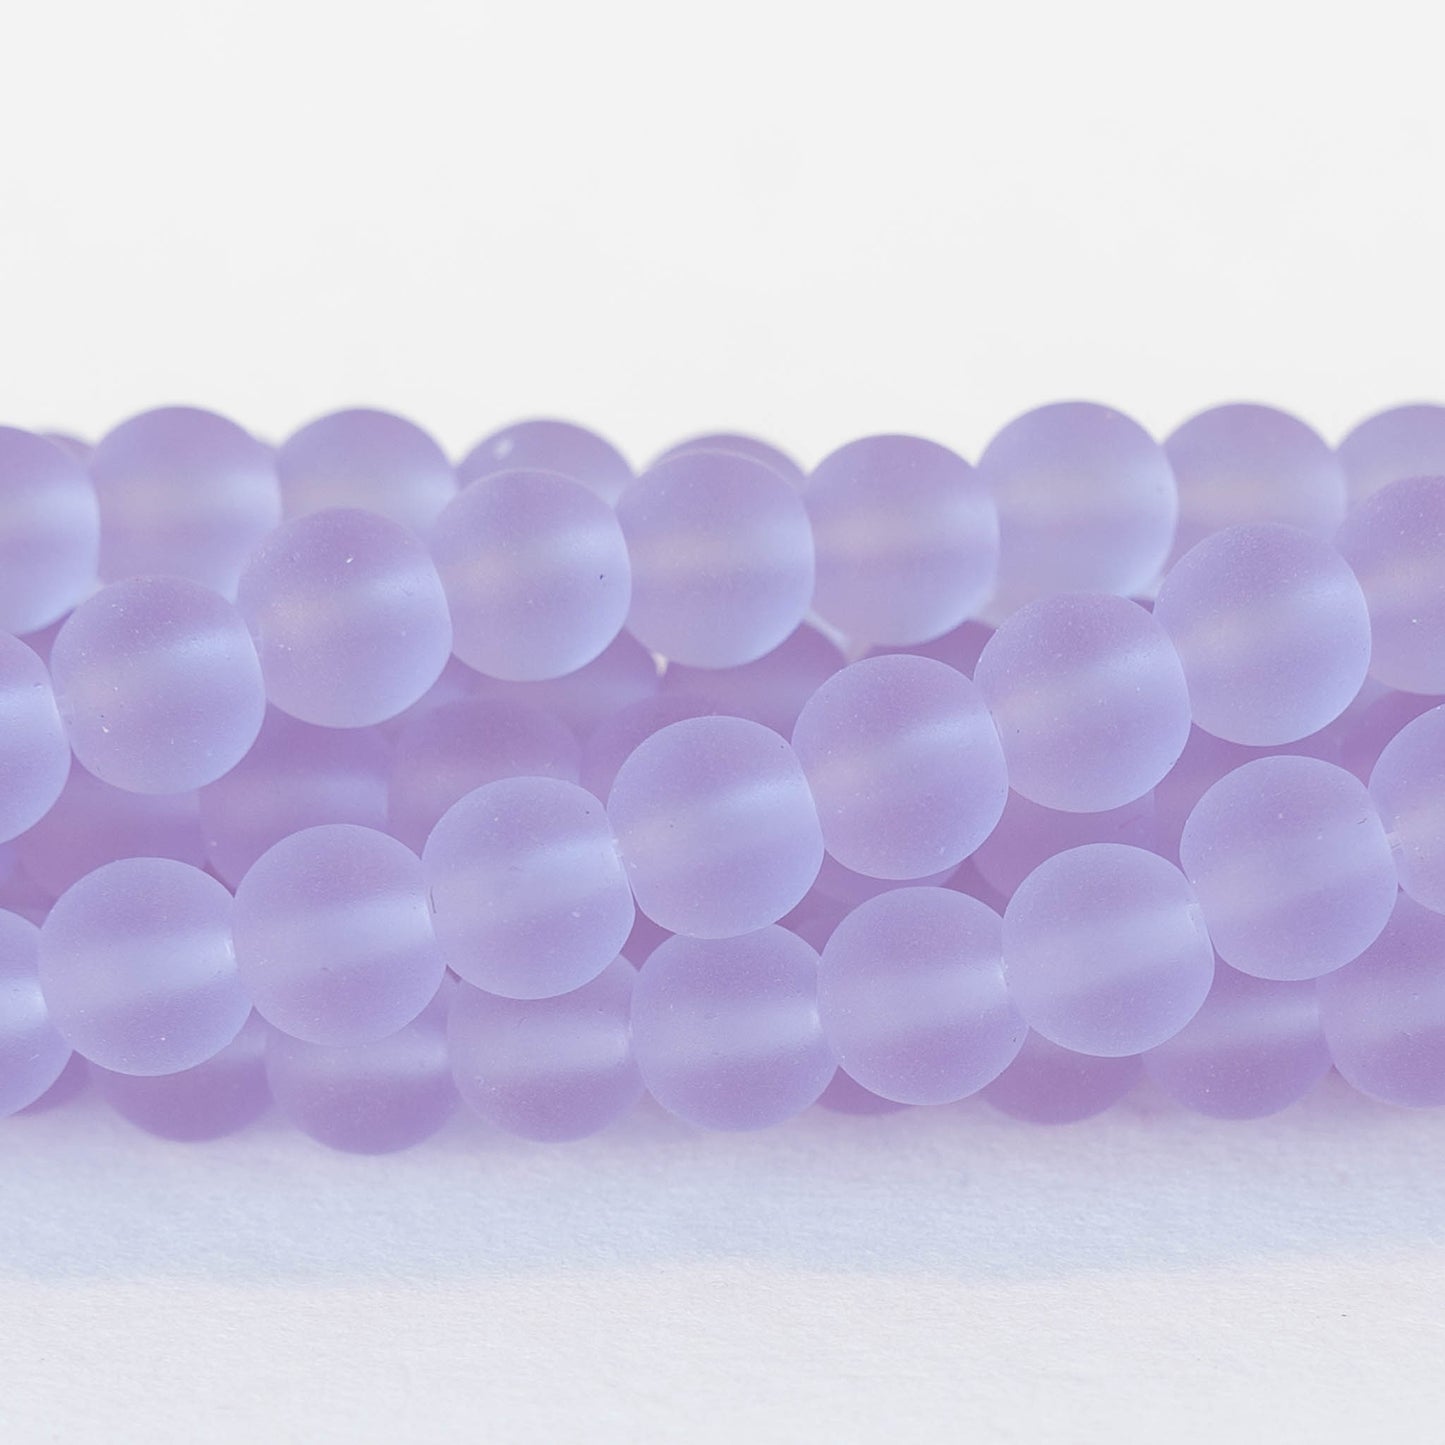 6mm Frosted Glass Round Beads - Frosted Lavender - 16 Inches